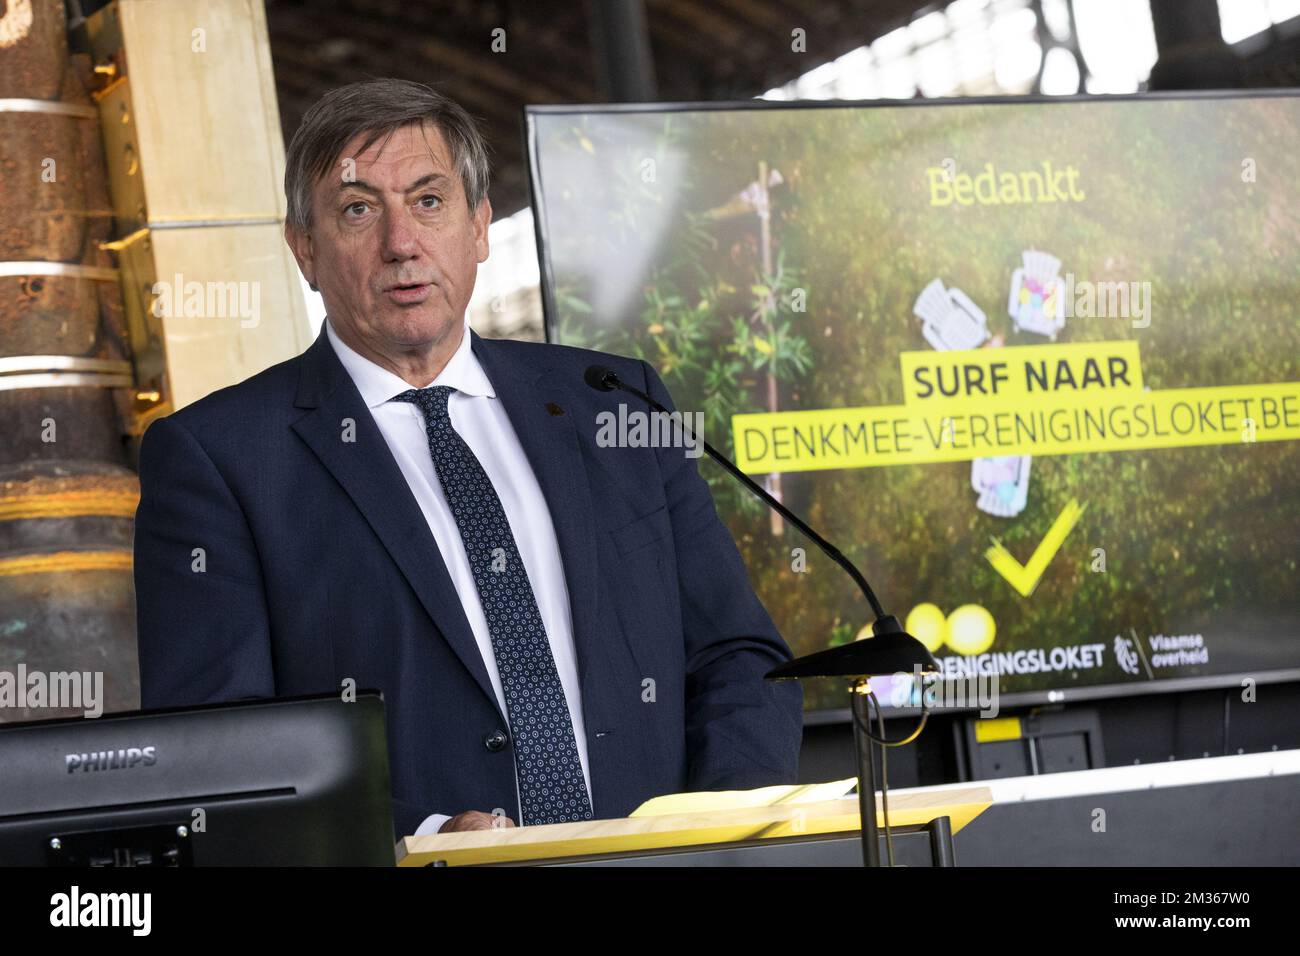 FOCUS COVERAGE REQUESTED TO BELGA - Flemish Minister President Jan Jambon pictured during Press and partners event around the Verenigingsloket for the launch of the digitization project, in Brussels, Thursday 21 October 2021. With the Verenigingsloket, an umbrella service platform for associations and local authorities, the Flemish government wants to bring together and simplify all interactions between associations and service providers in one place and thus facilitate administration for associations and make it more efficient, clearer and more pleasant. BELGA PHOTO HATIM KAGHAT Stock Photo